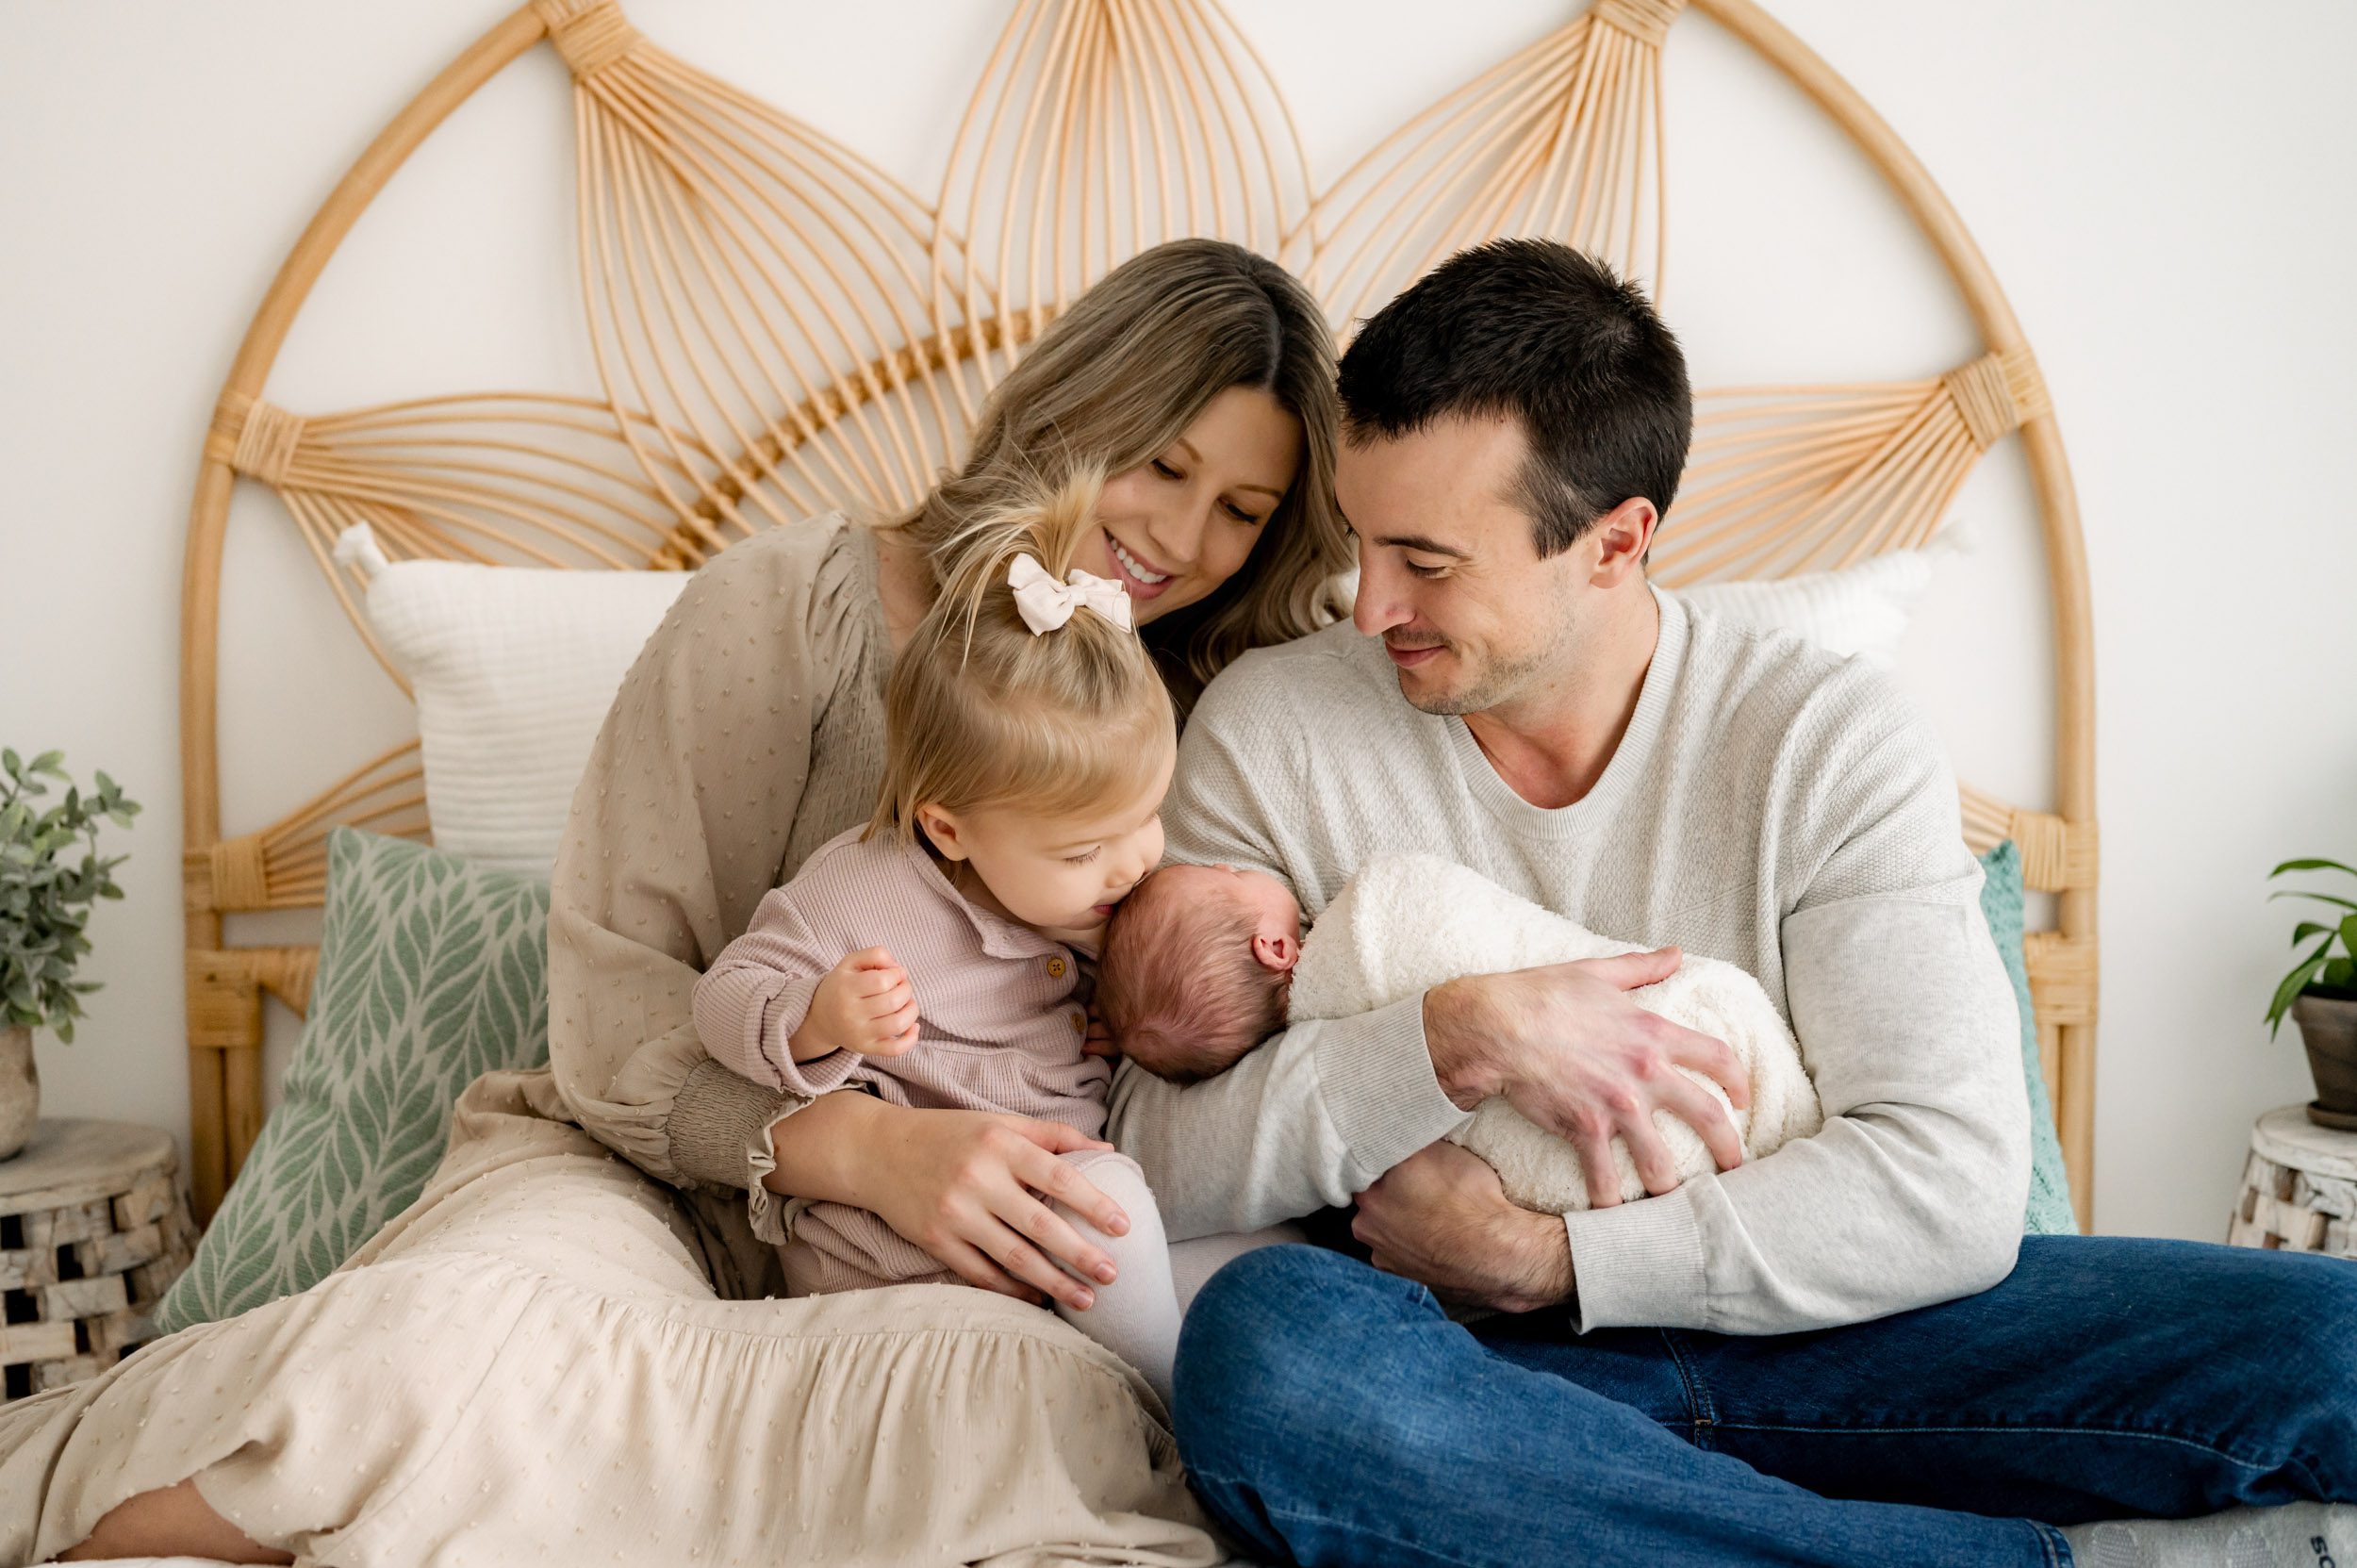 parents sitting on a bed with their baby girl in dad's arms and their older daughter sitting on mom's lapping and kissing her baby sister on the head during a newborn photography session